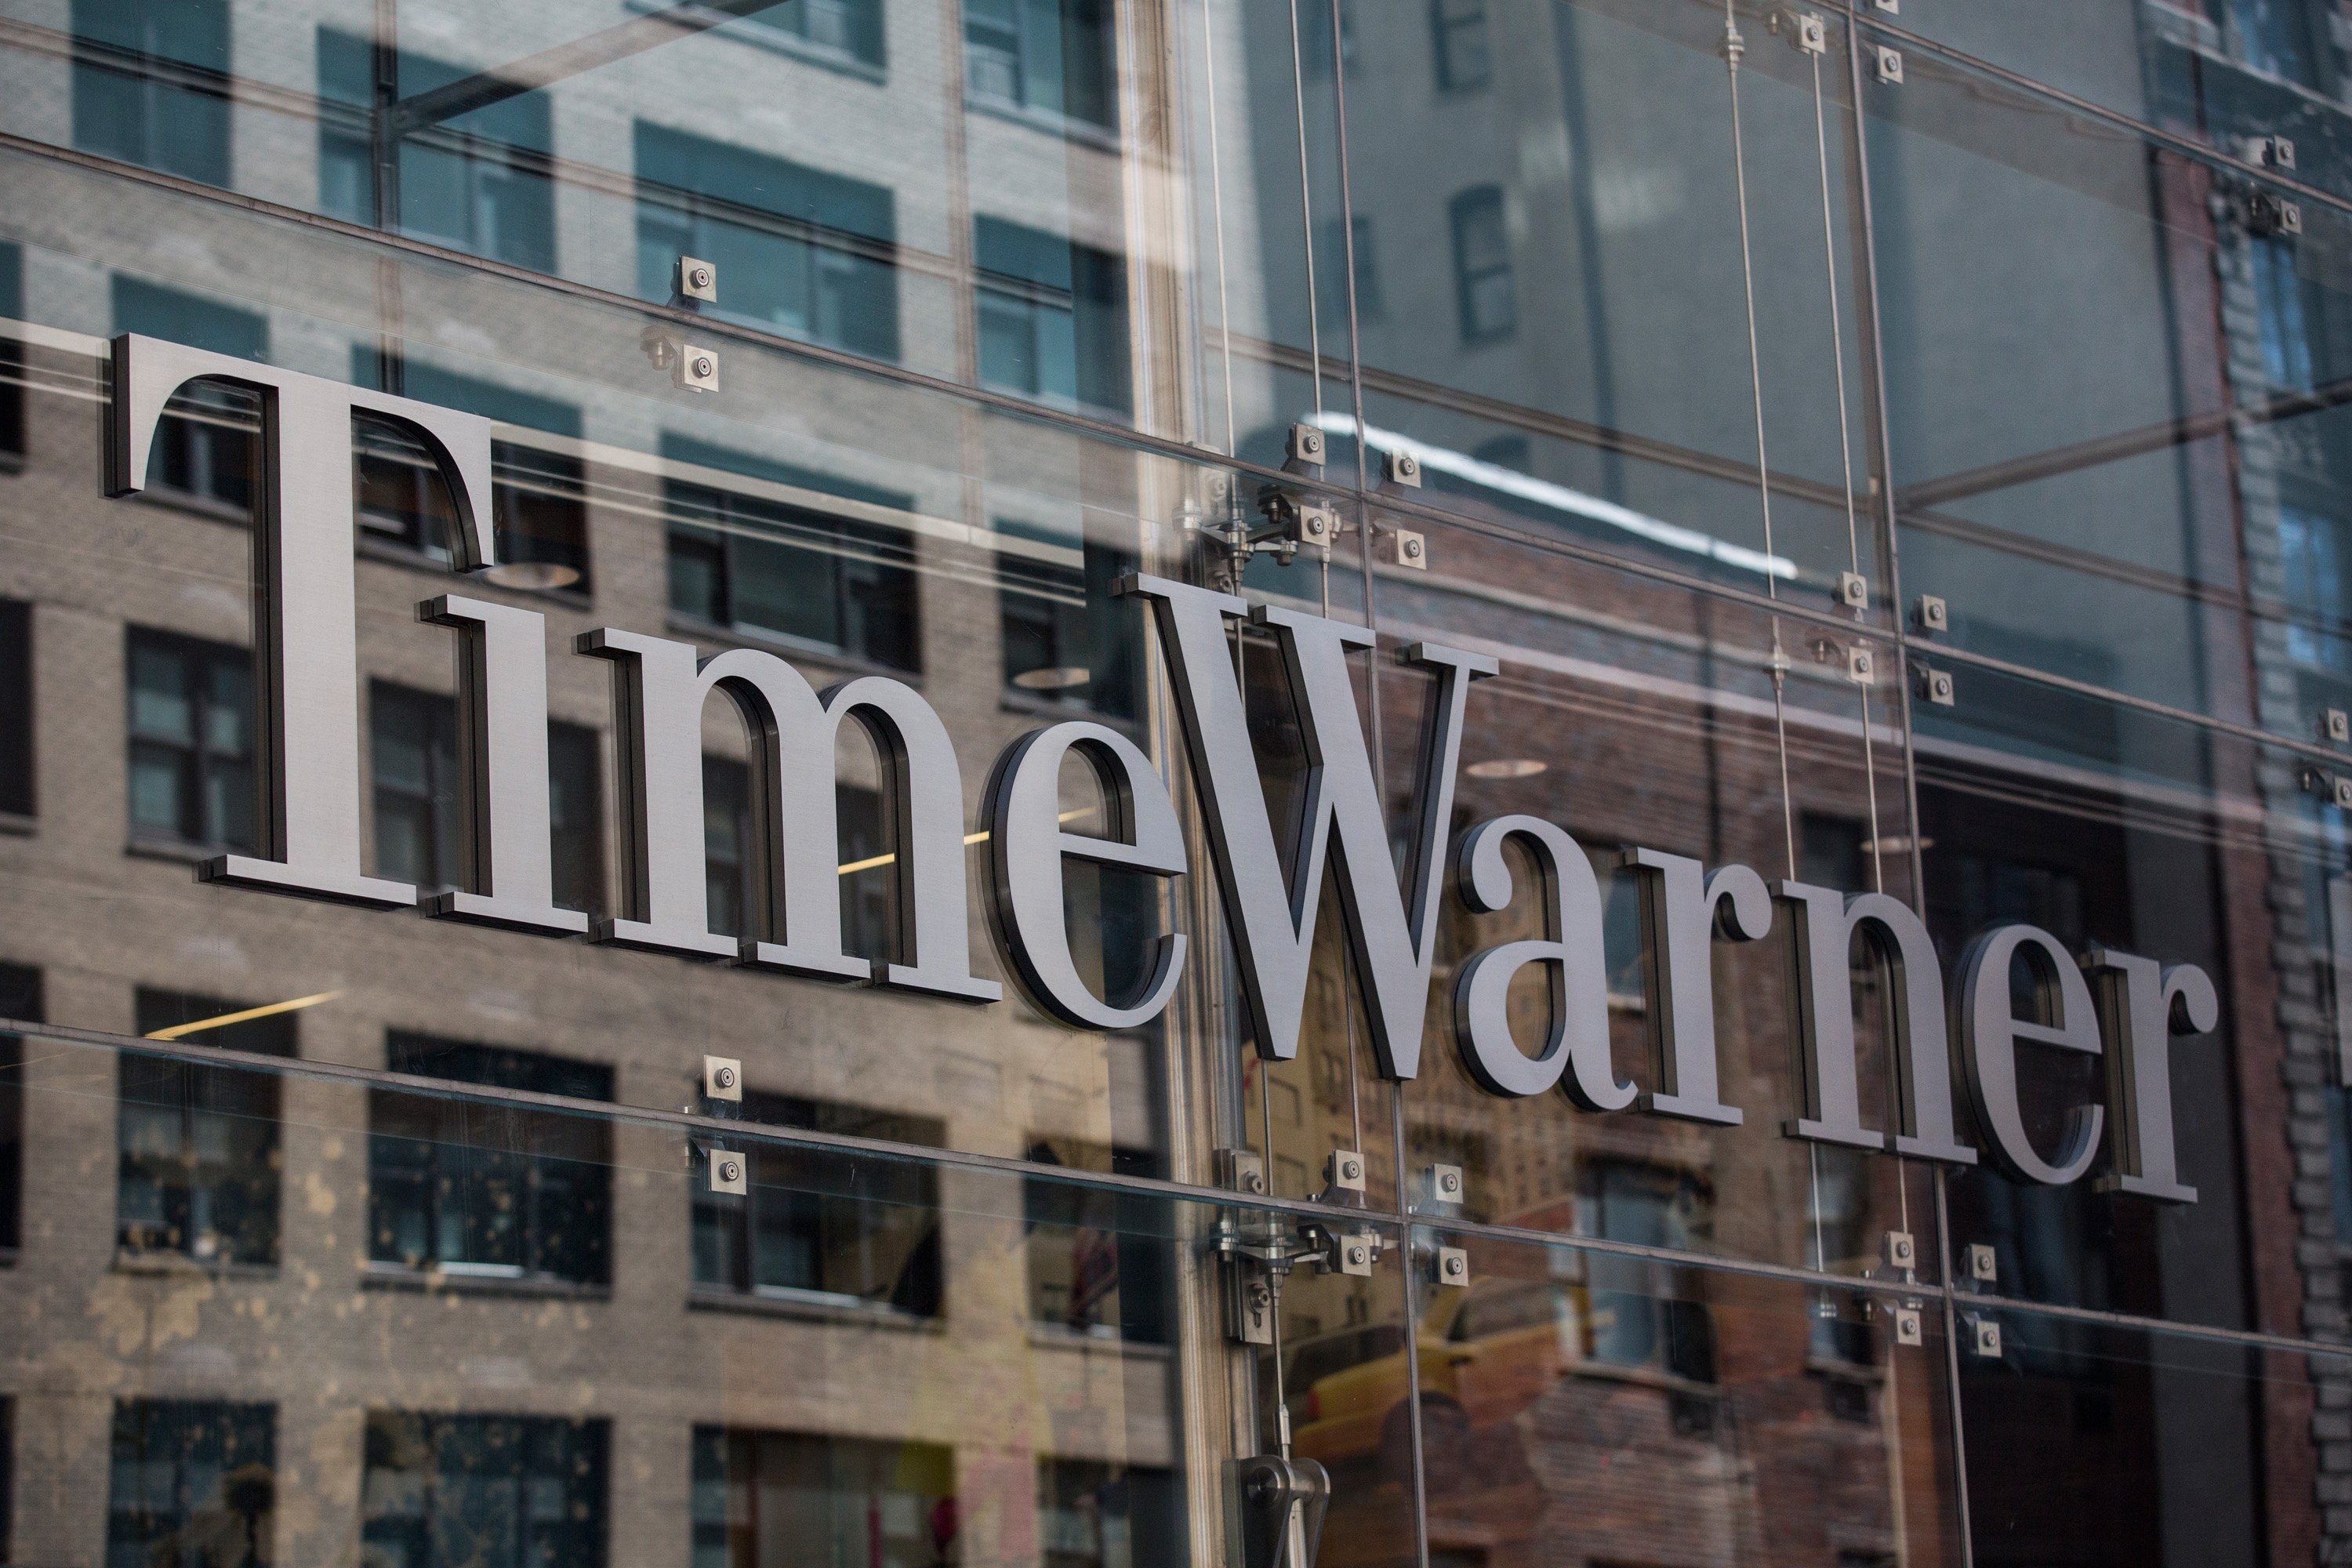 Time Warner Cable headquarters are seen in Columbus Circle on May 26, 2015 in New York City. (Andrew Burton—Getty Images)